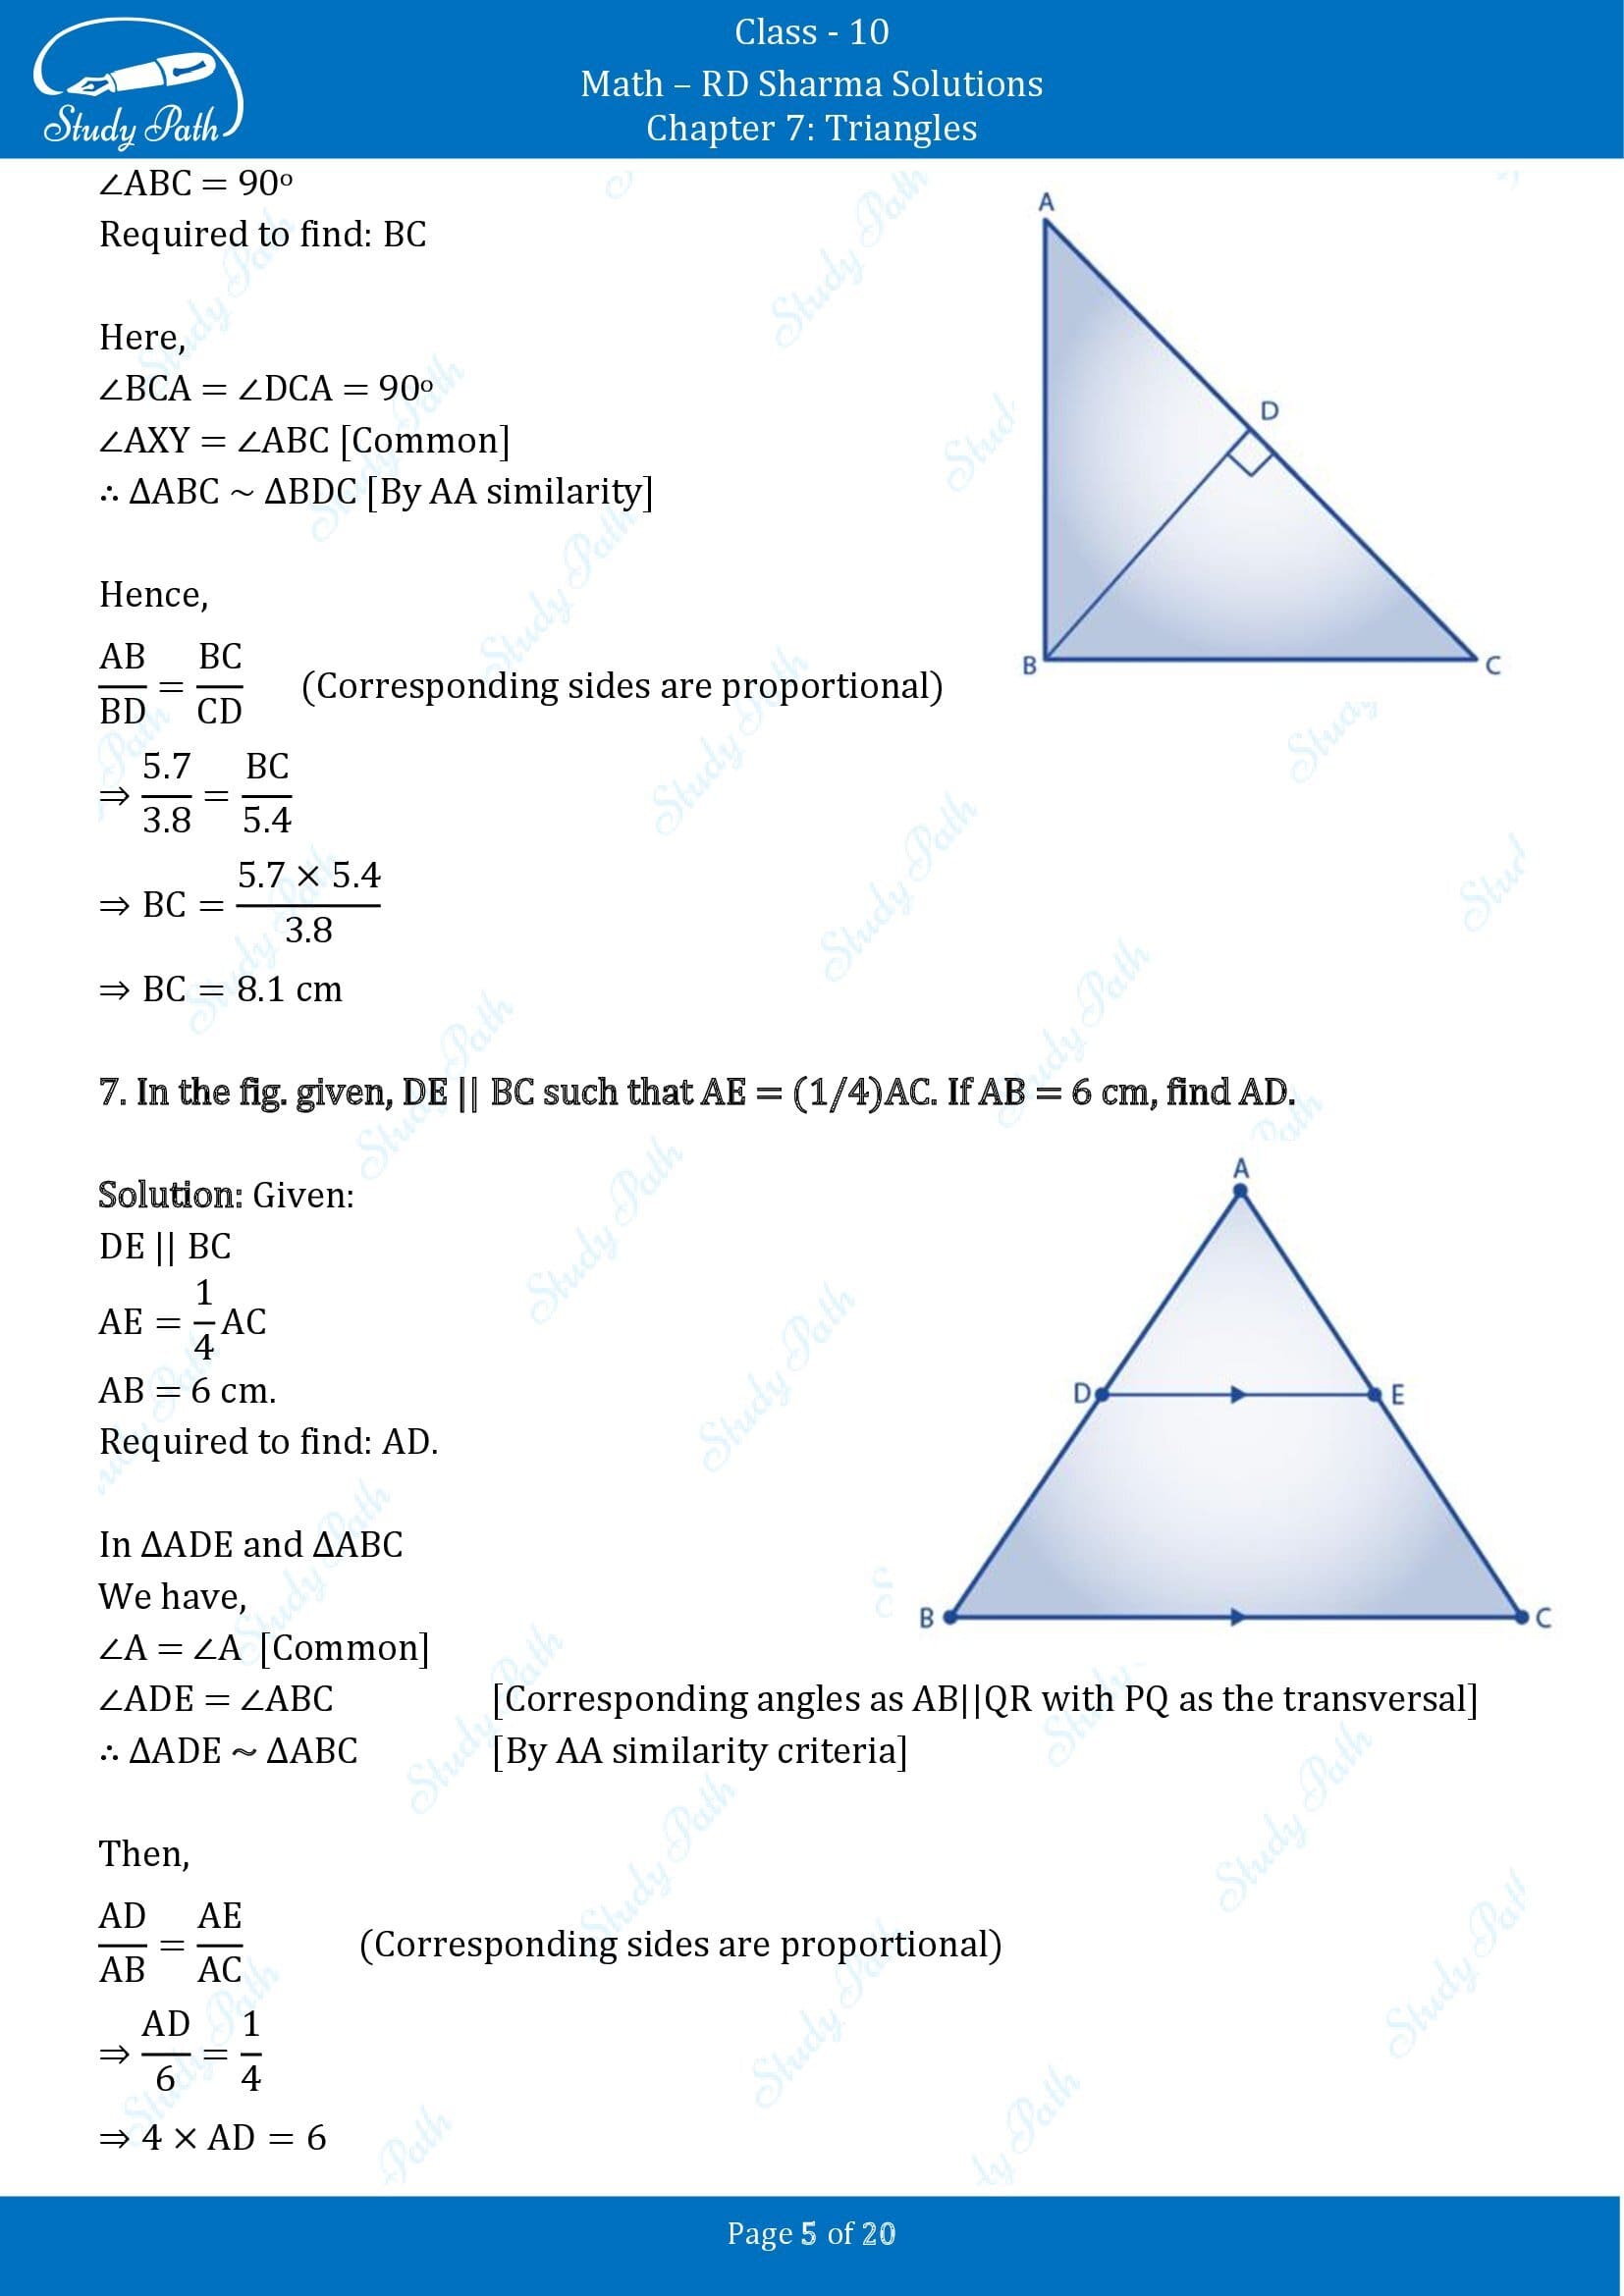 RD Sharma Solutions Class 10 Chapter 7 Triangles Exercise 7.5 00005